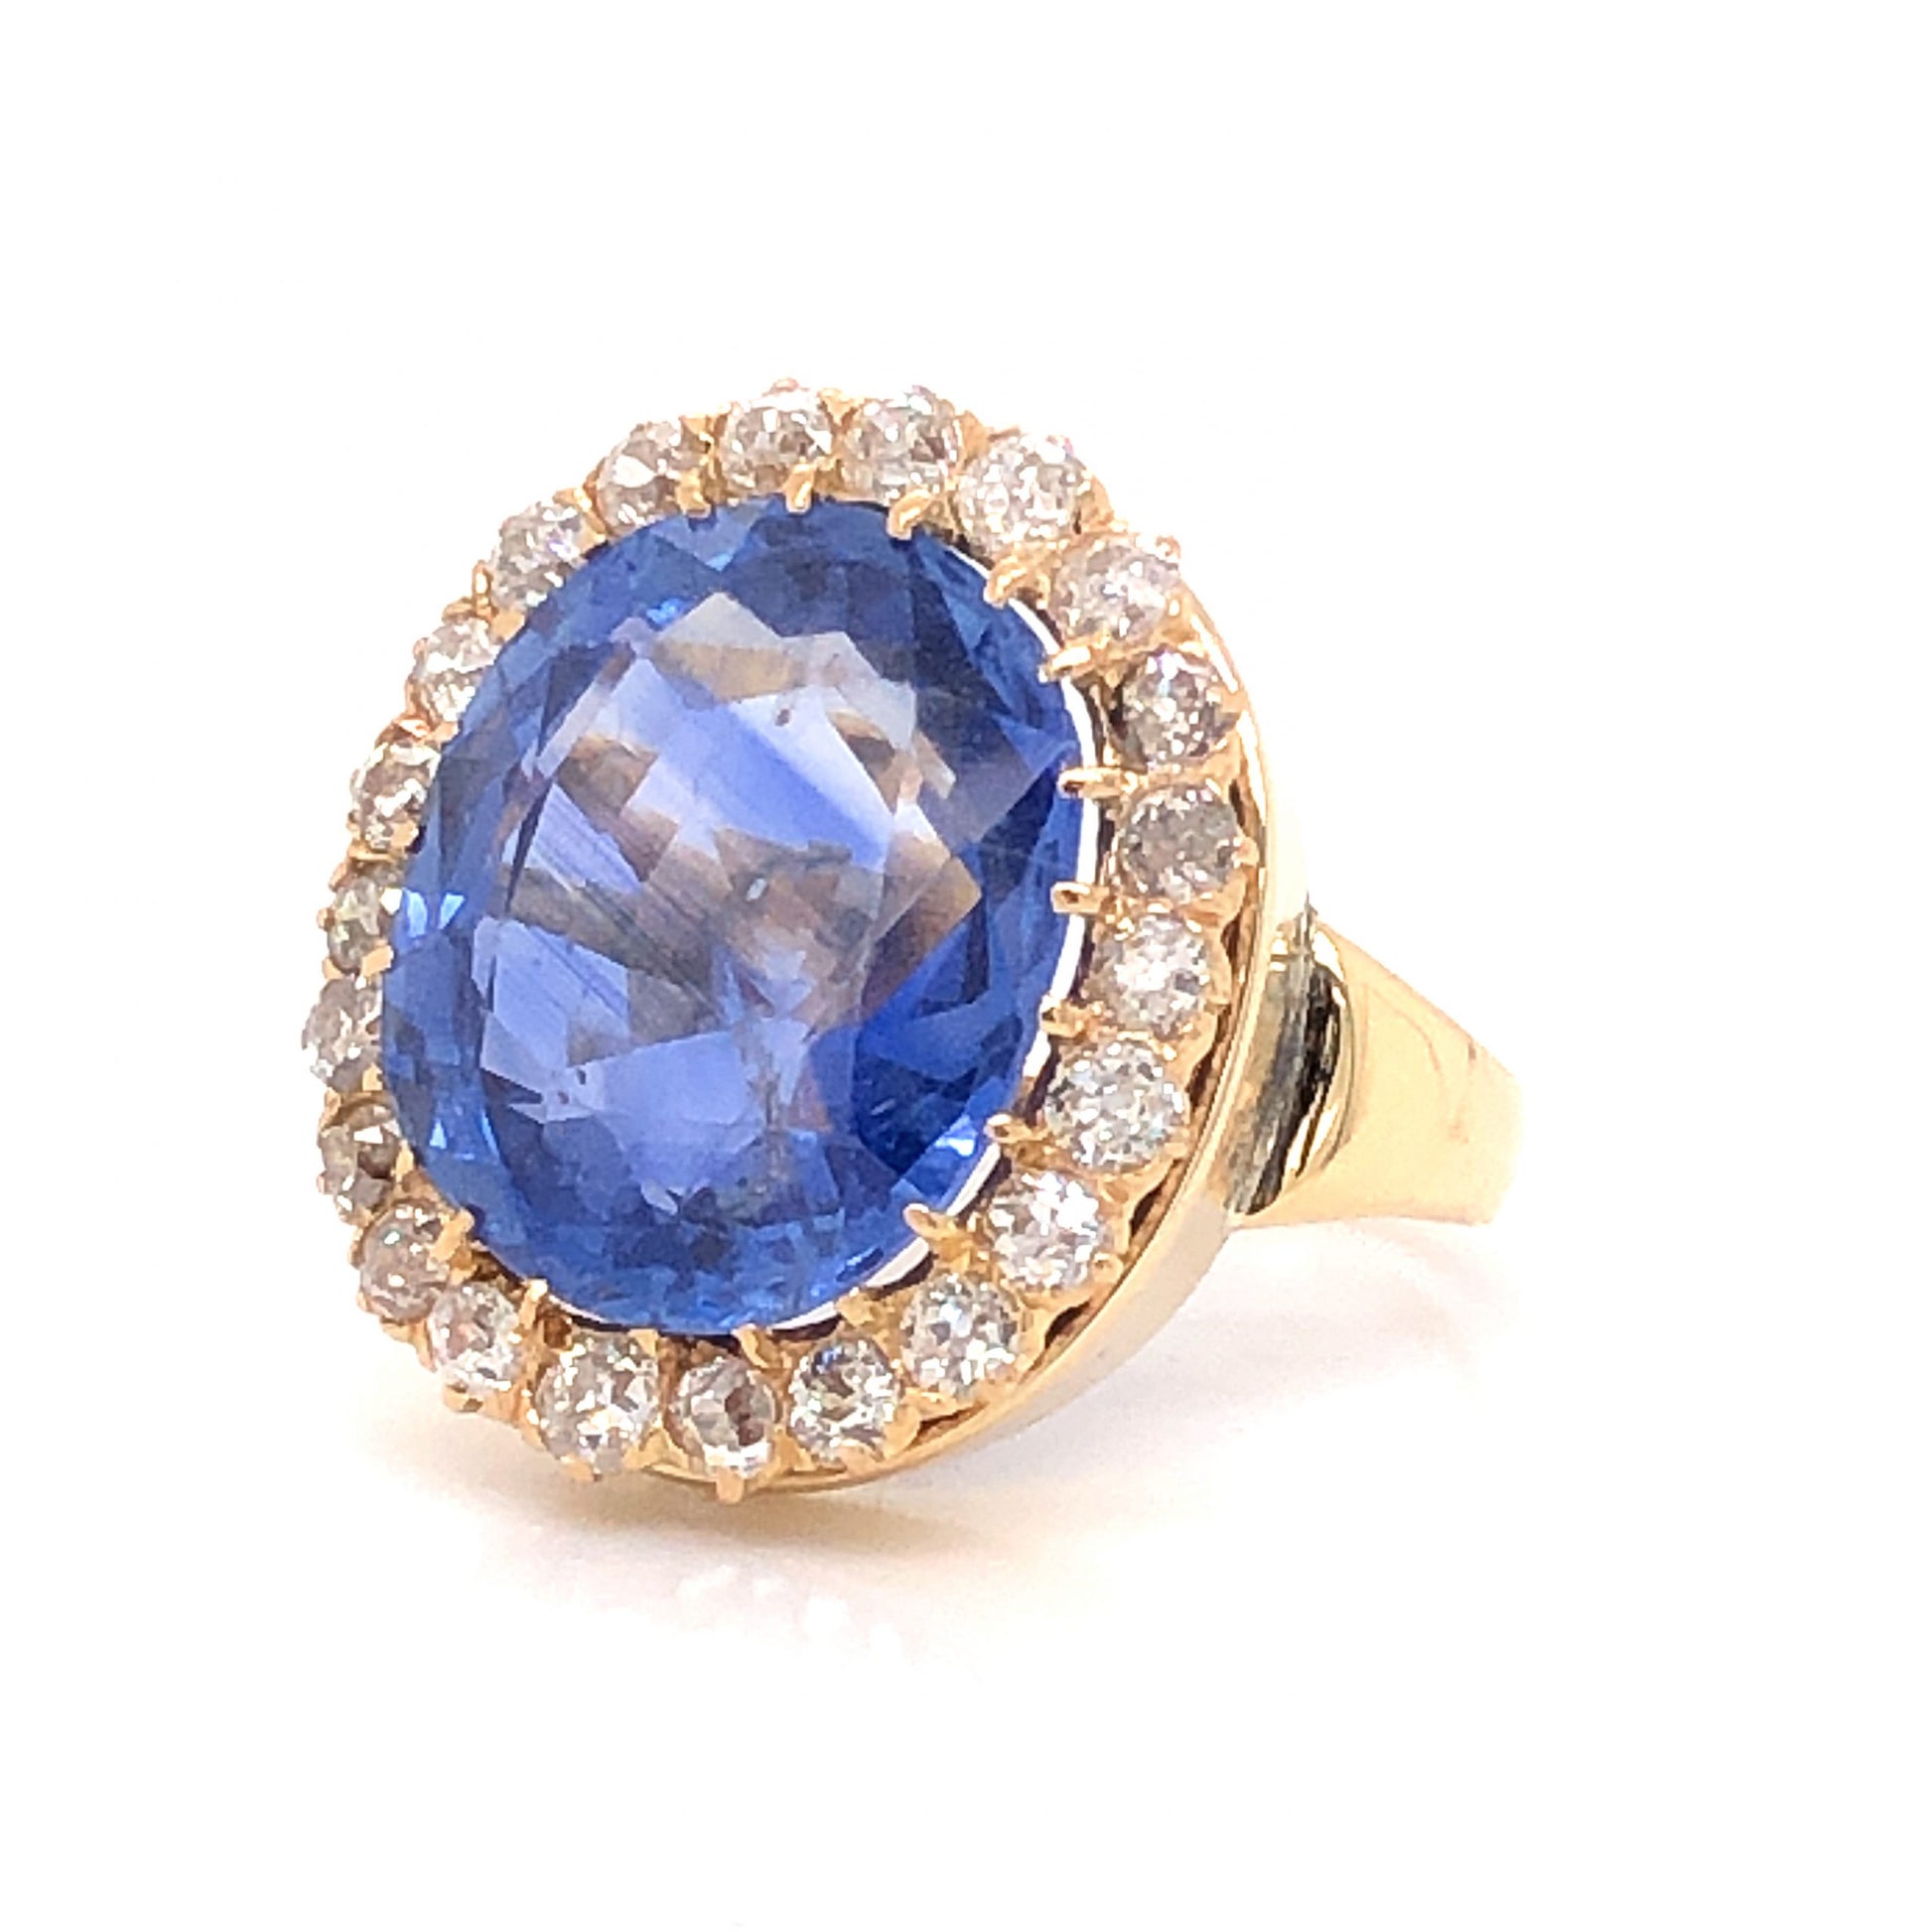 9.62 Victorian Blue Spinel & Diamond Cocktail Ring in 14kComposition: PlatinumRing Size: 6.5Total Diamond Weight: 1.54 ctTotal Gram Weight: 7.4 g